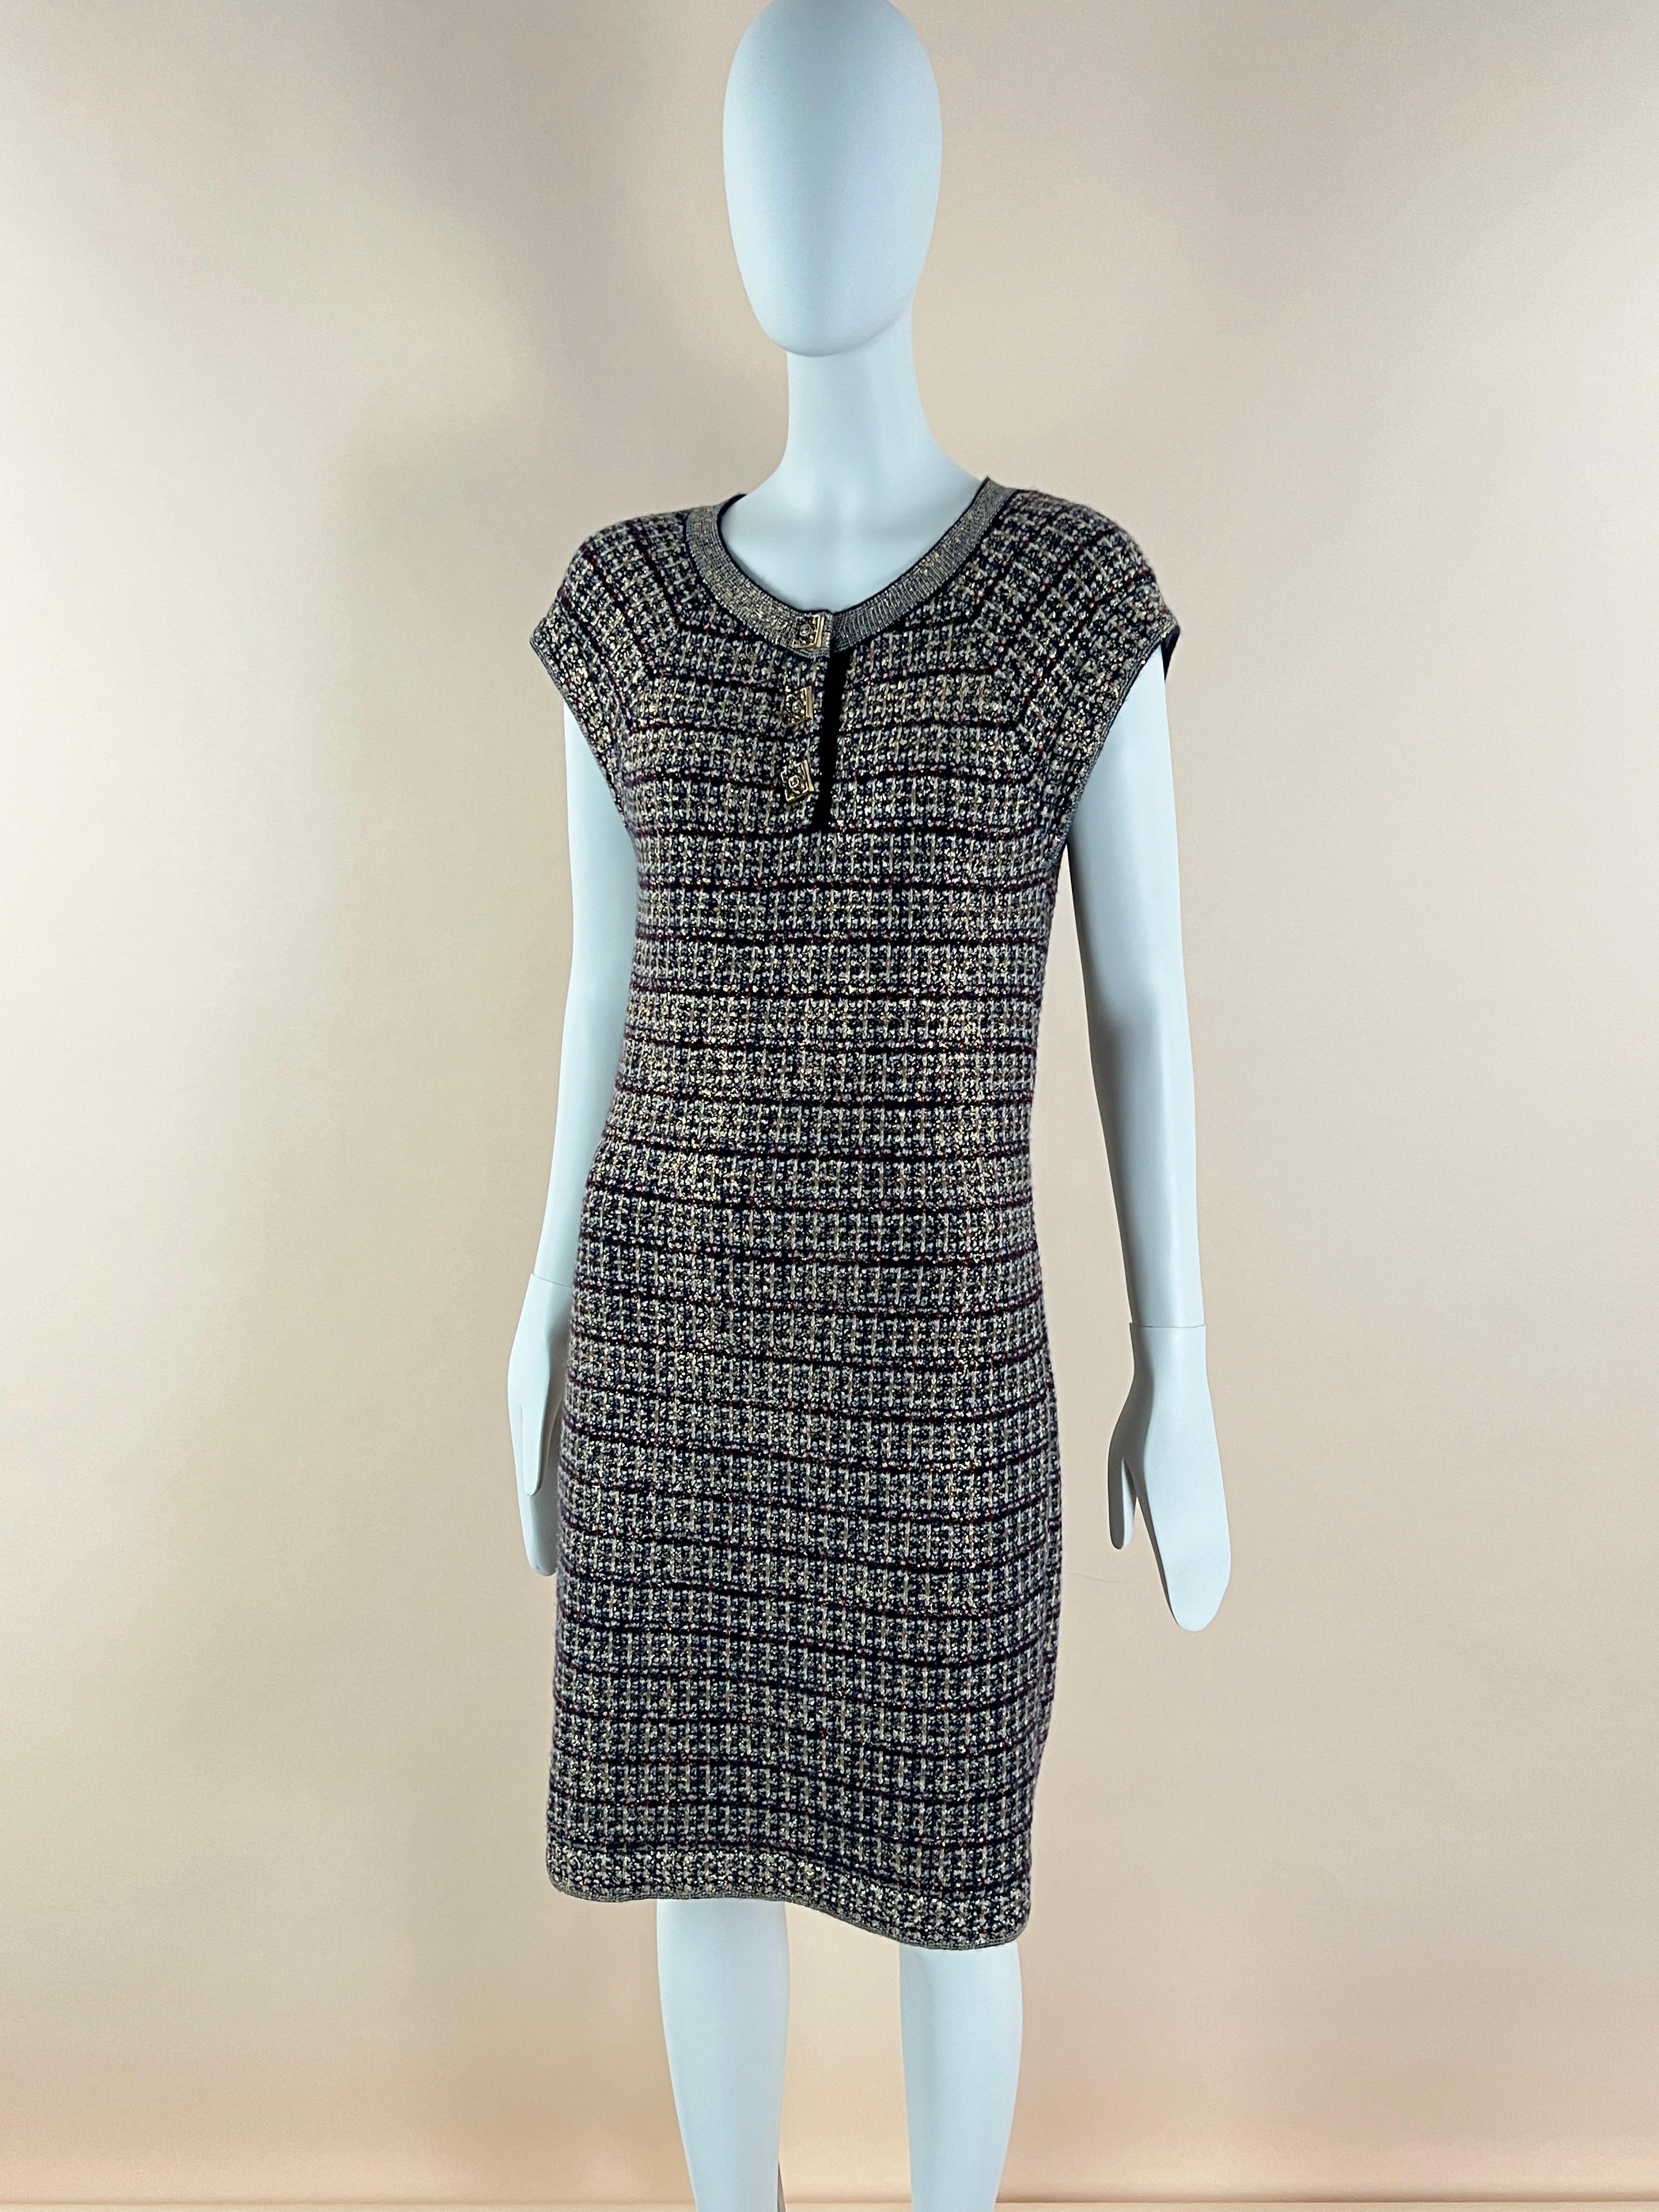 Chanel Paris / Byzance CC Jewel Buttons Dress In New Condition For Sale In Dubai, AE